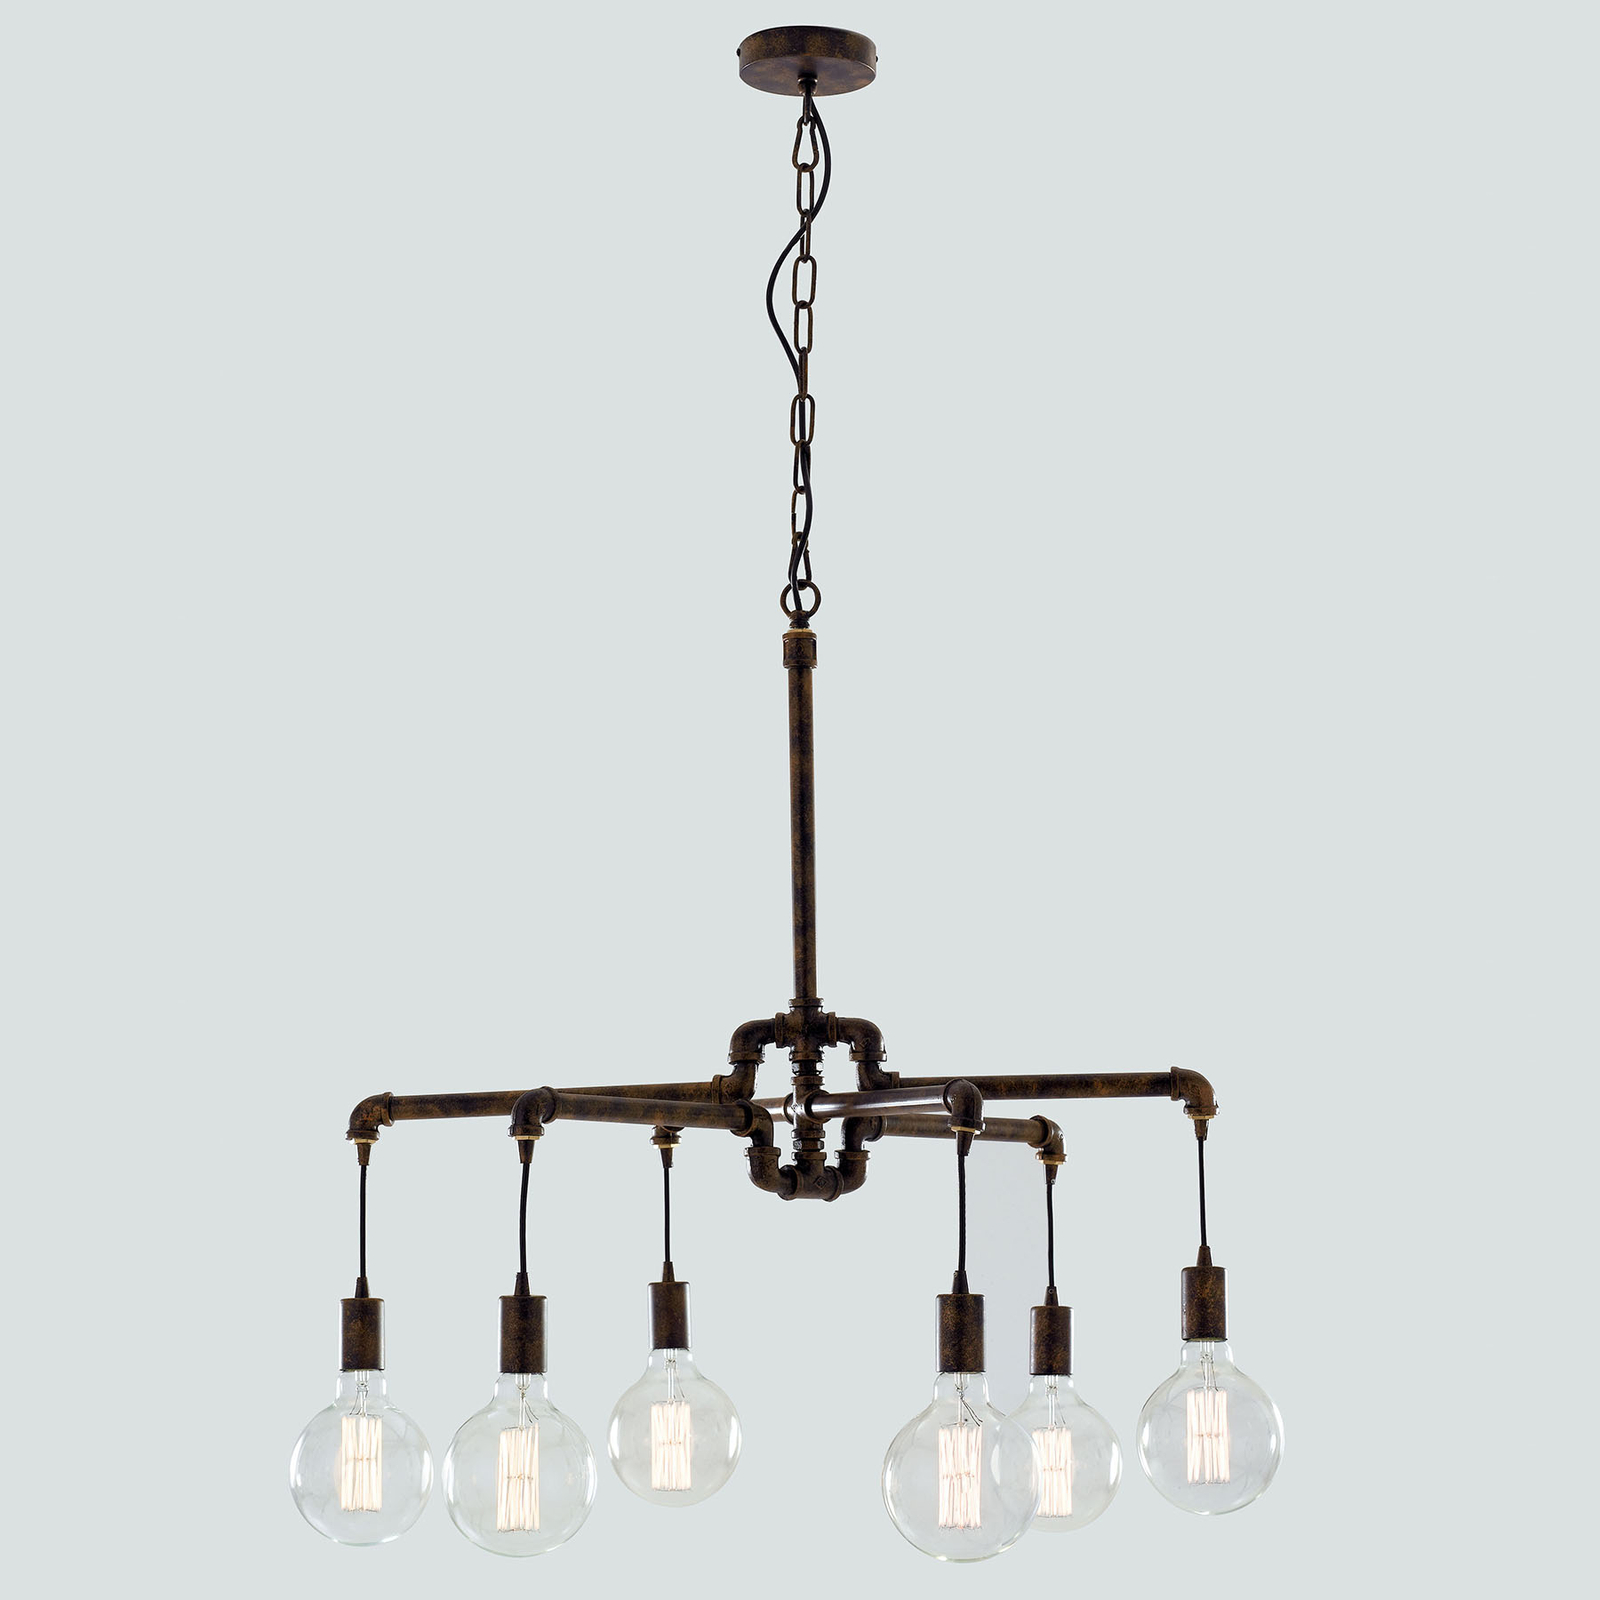 Hanglamp Amarcord, roestbruin, 6-lamps